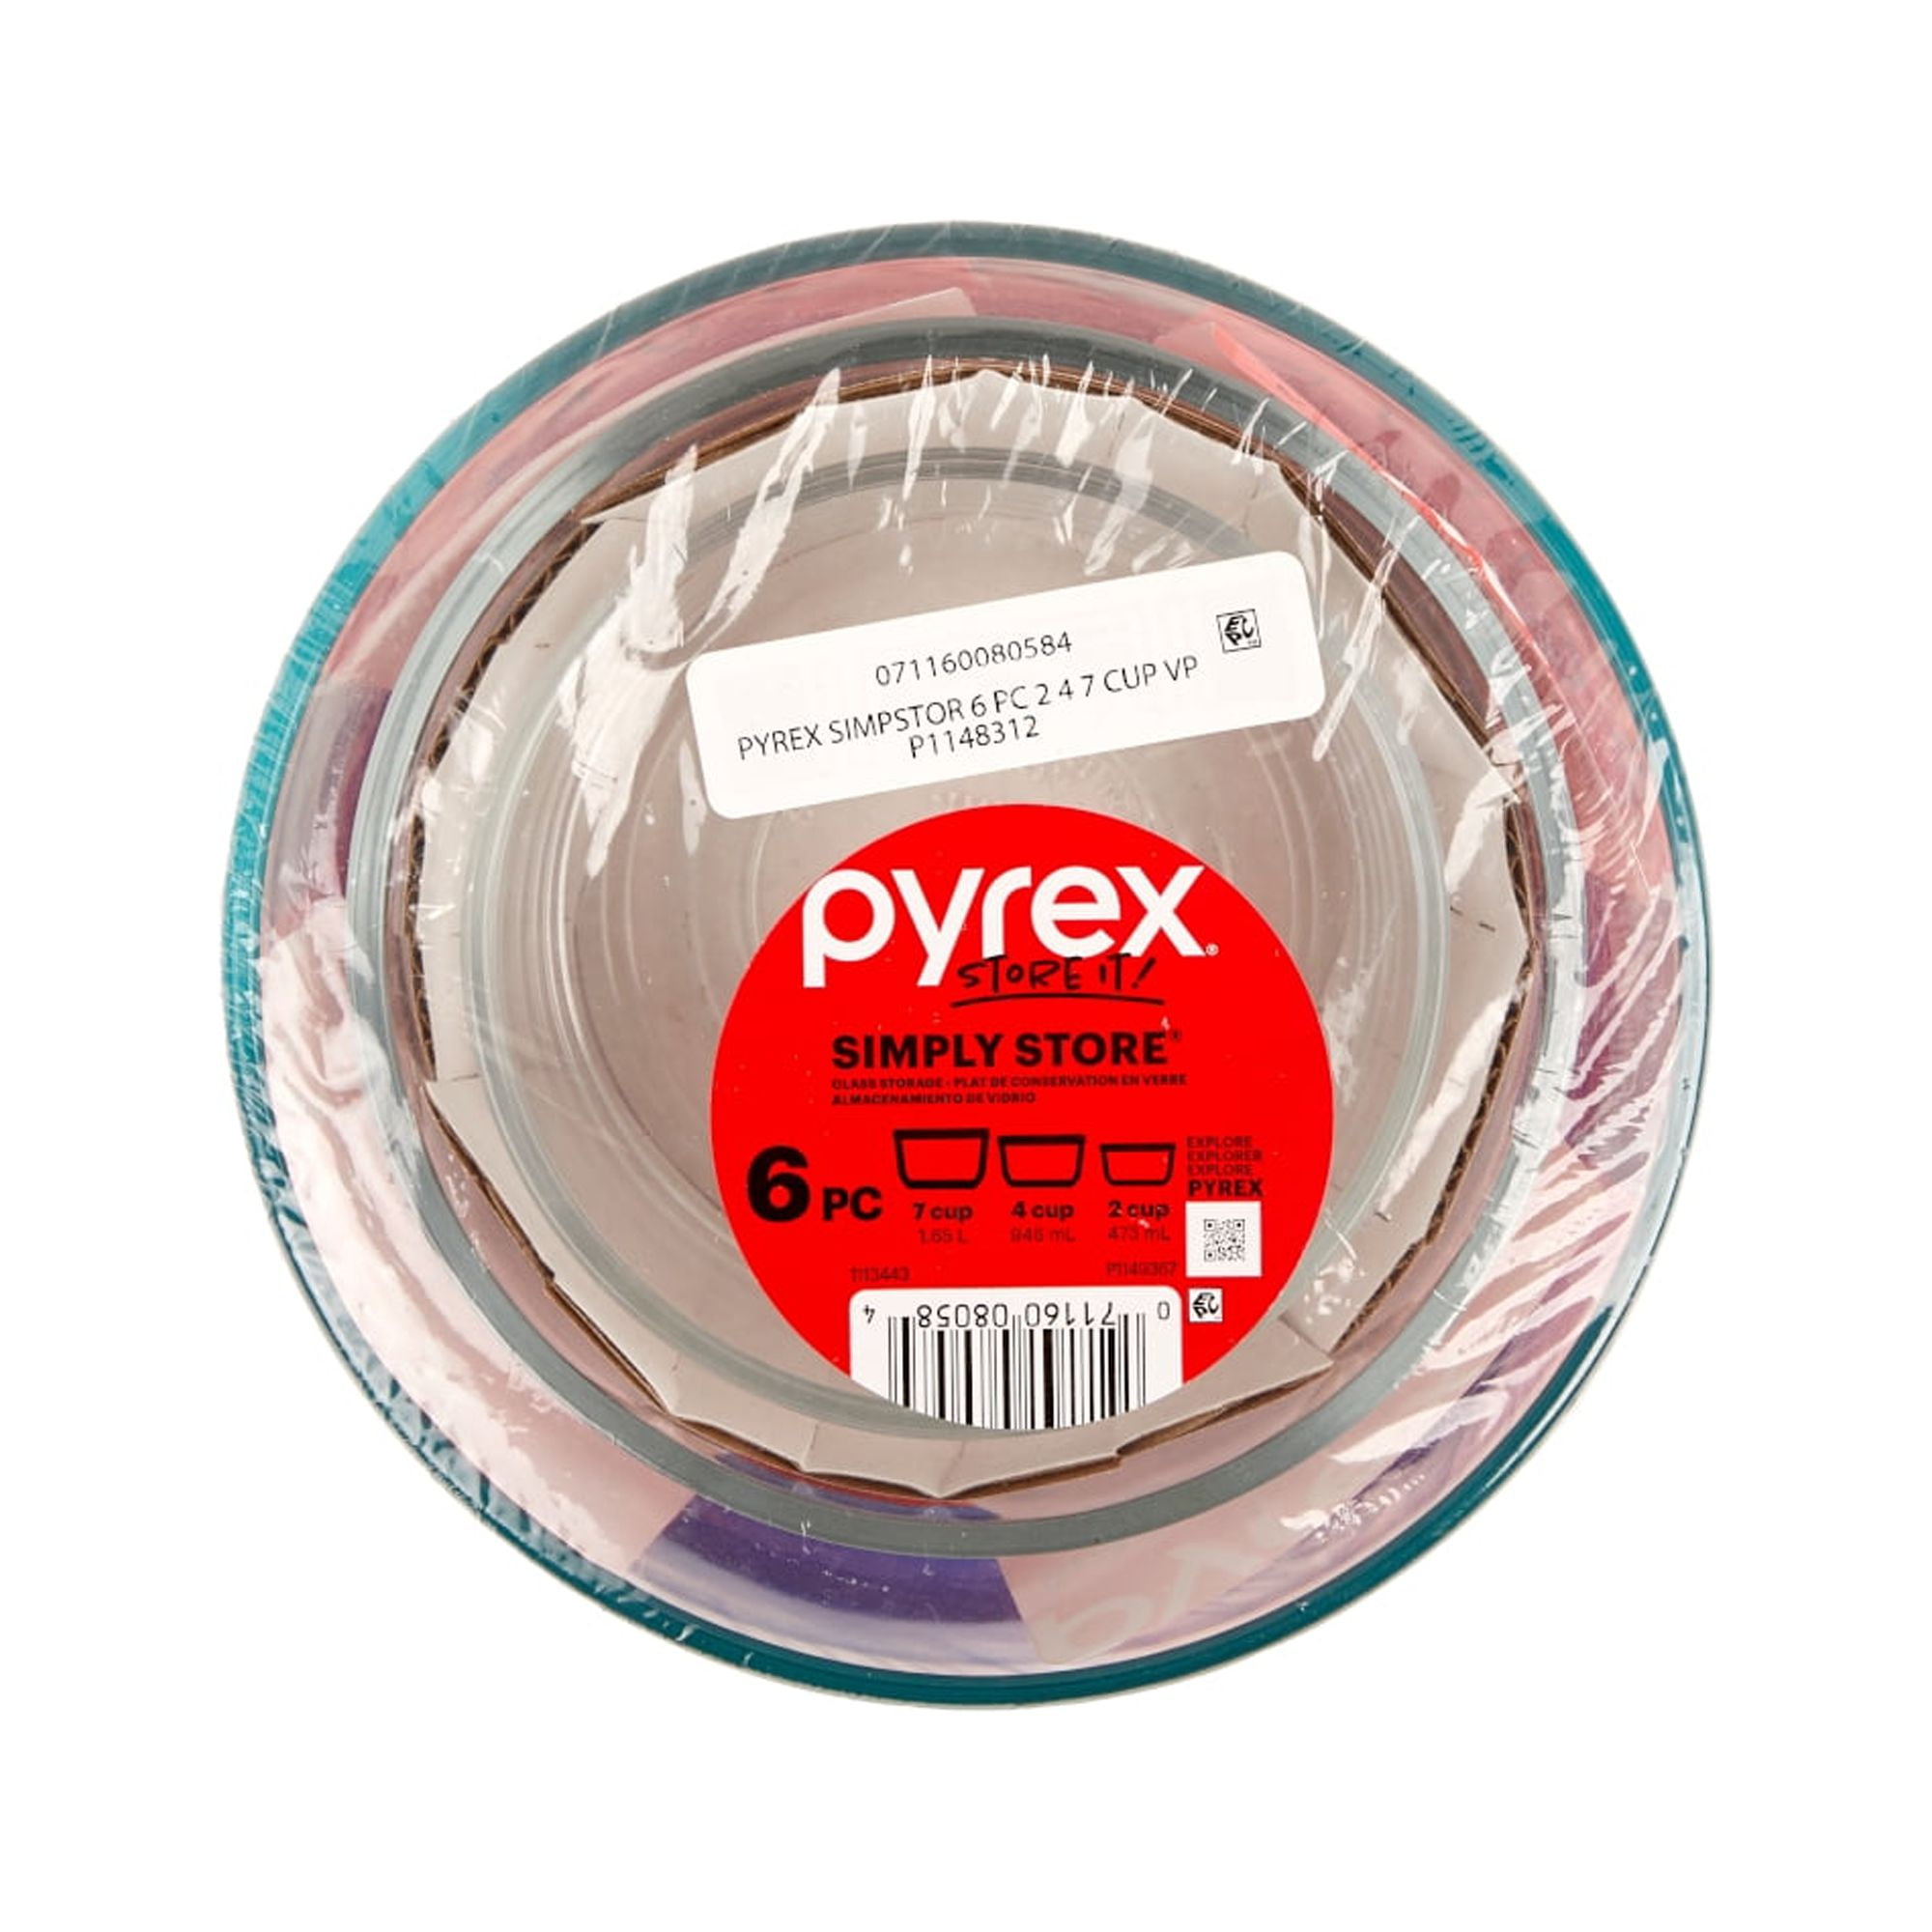 Pyrex Freshlock 1 Cup Square Glass Value Pack Set 6 ct